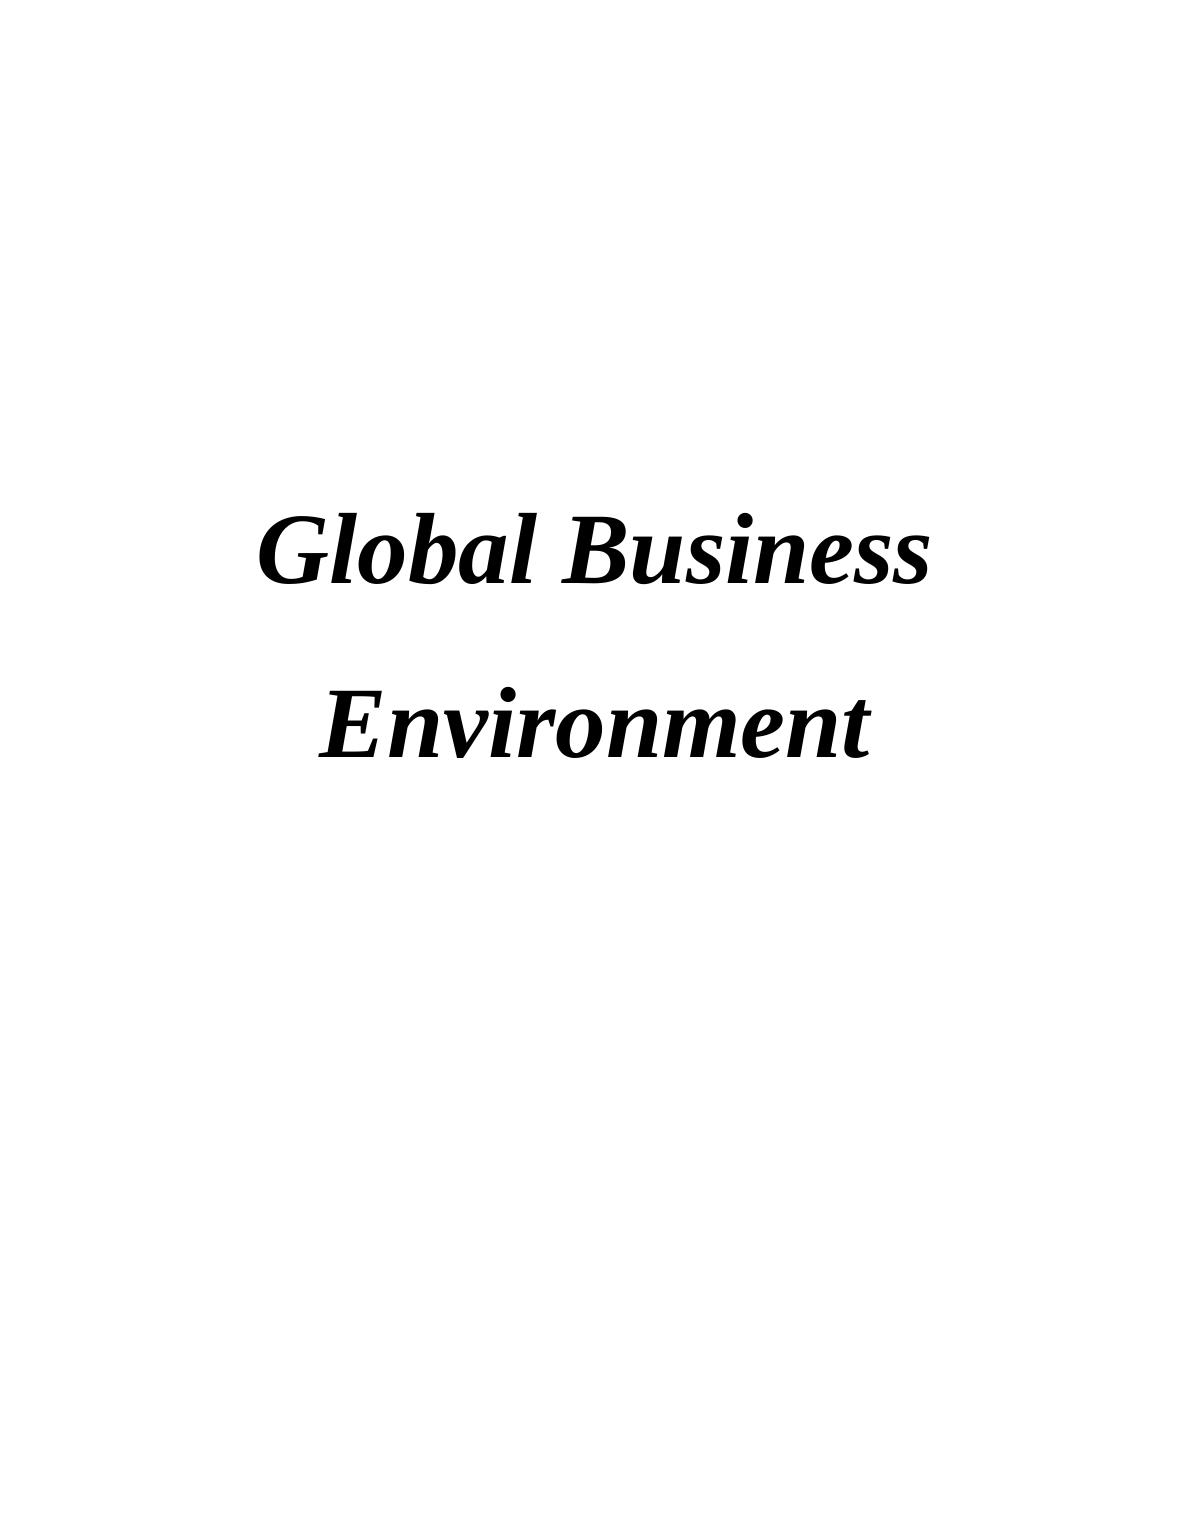 Global Business Environment Assignment - Clif bar & company_1